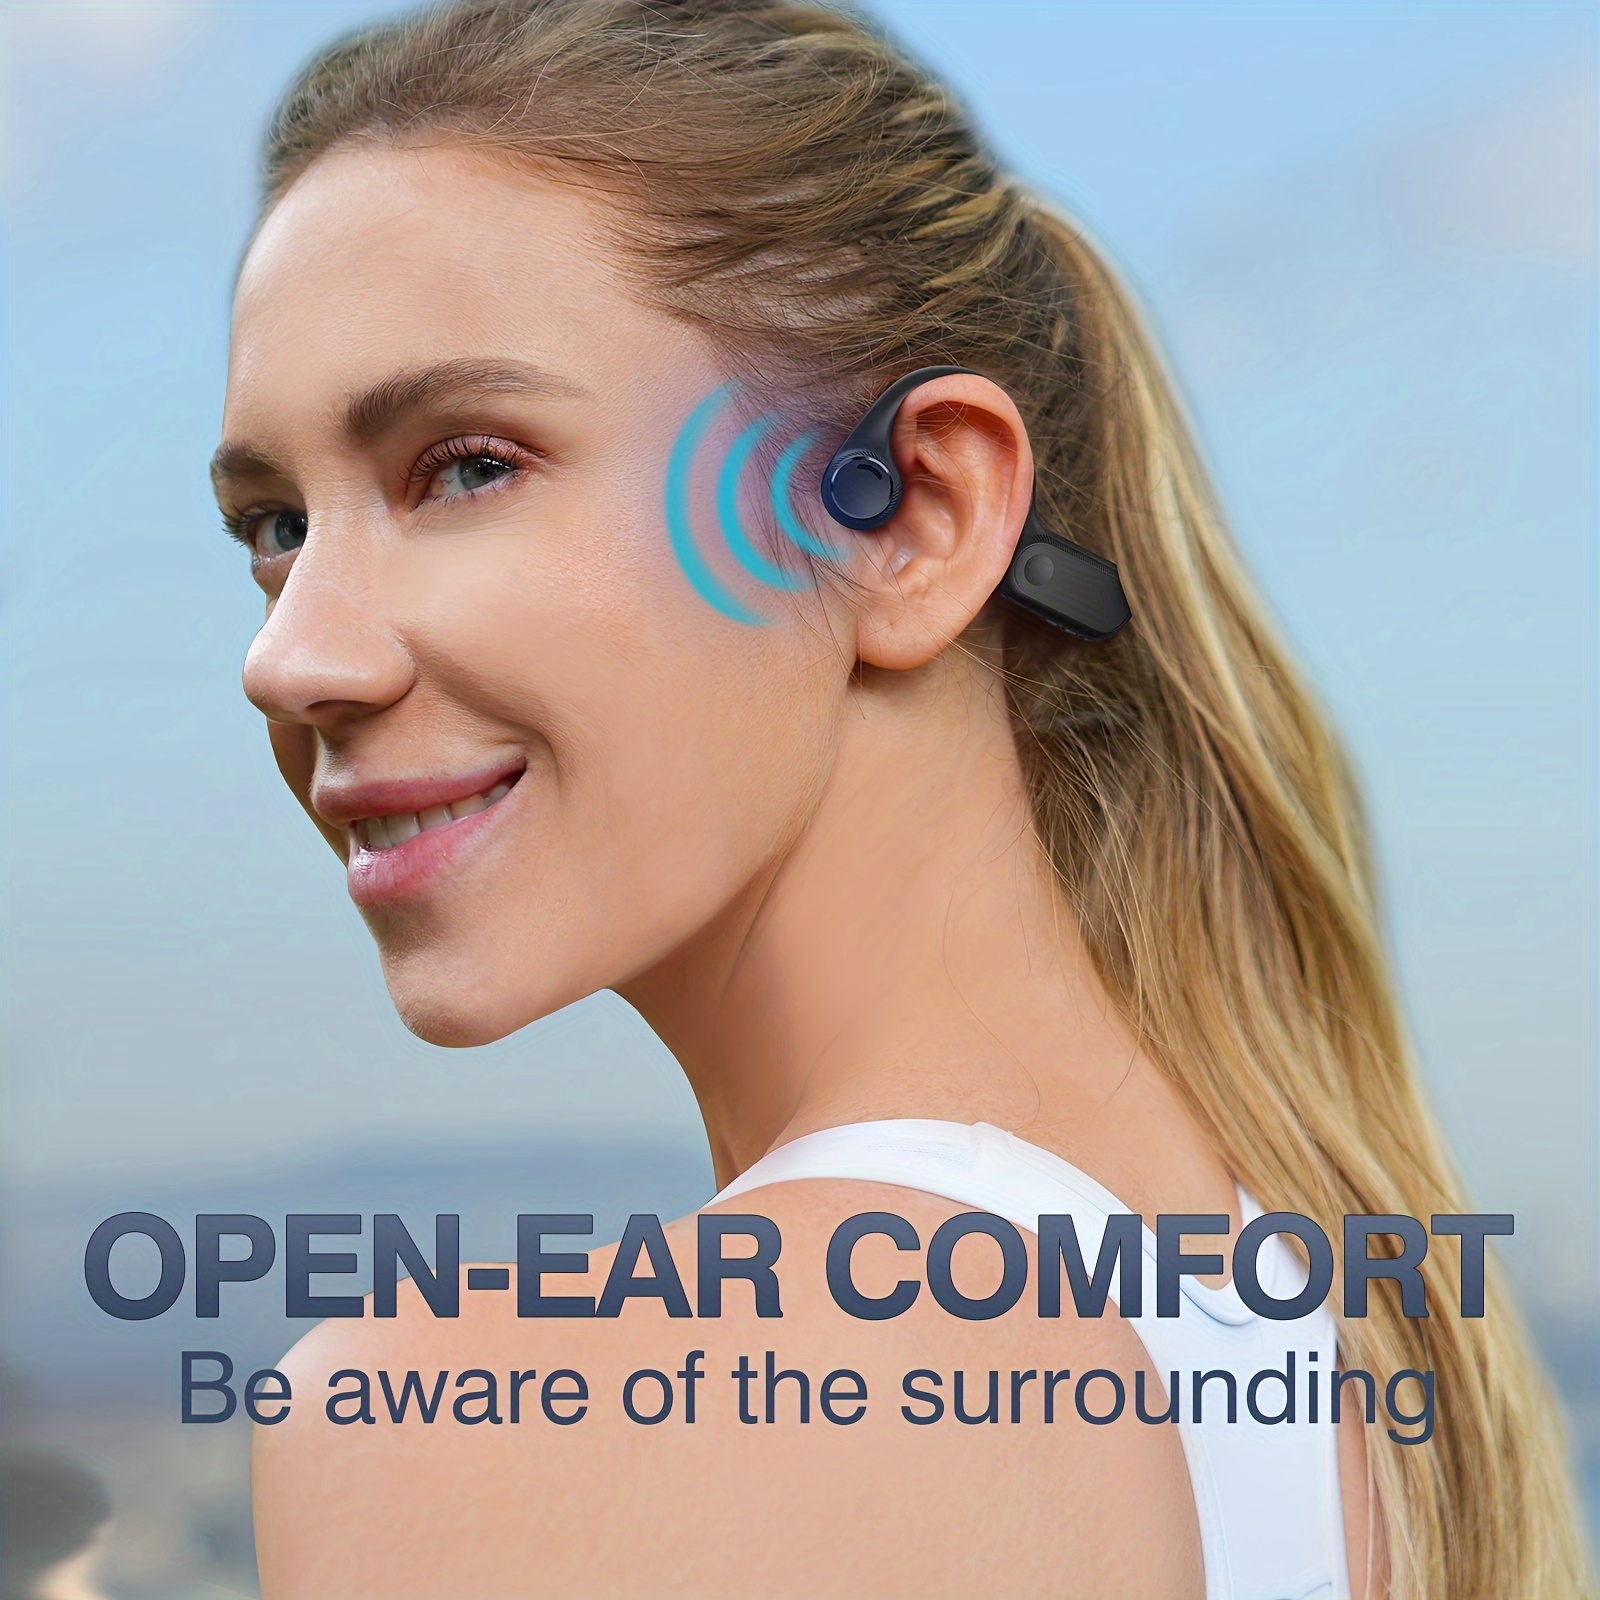 

Open Ear Air Conduction Headphones With Noise-canceling Mic, Sport Headphones, Open Ear Stereo Headphones Up To 8h Playtime, Wireless Headset For Running